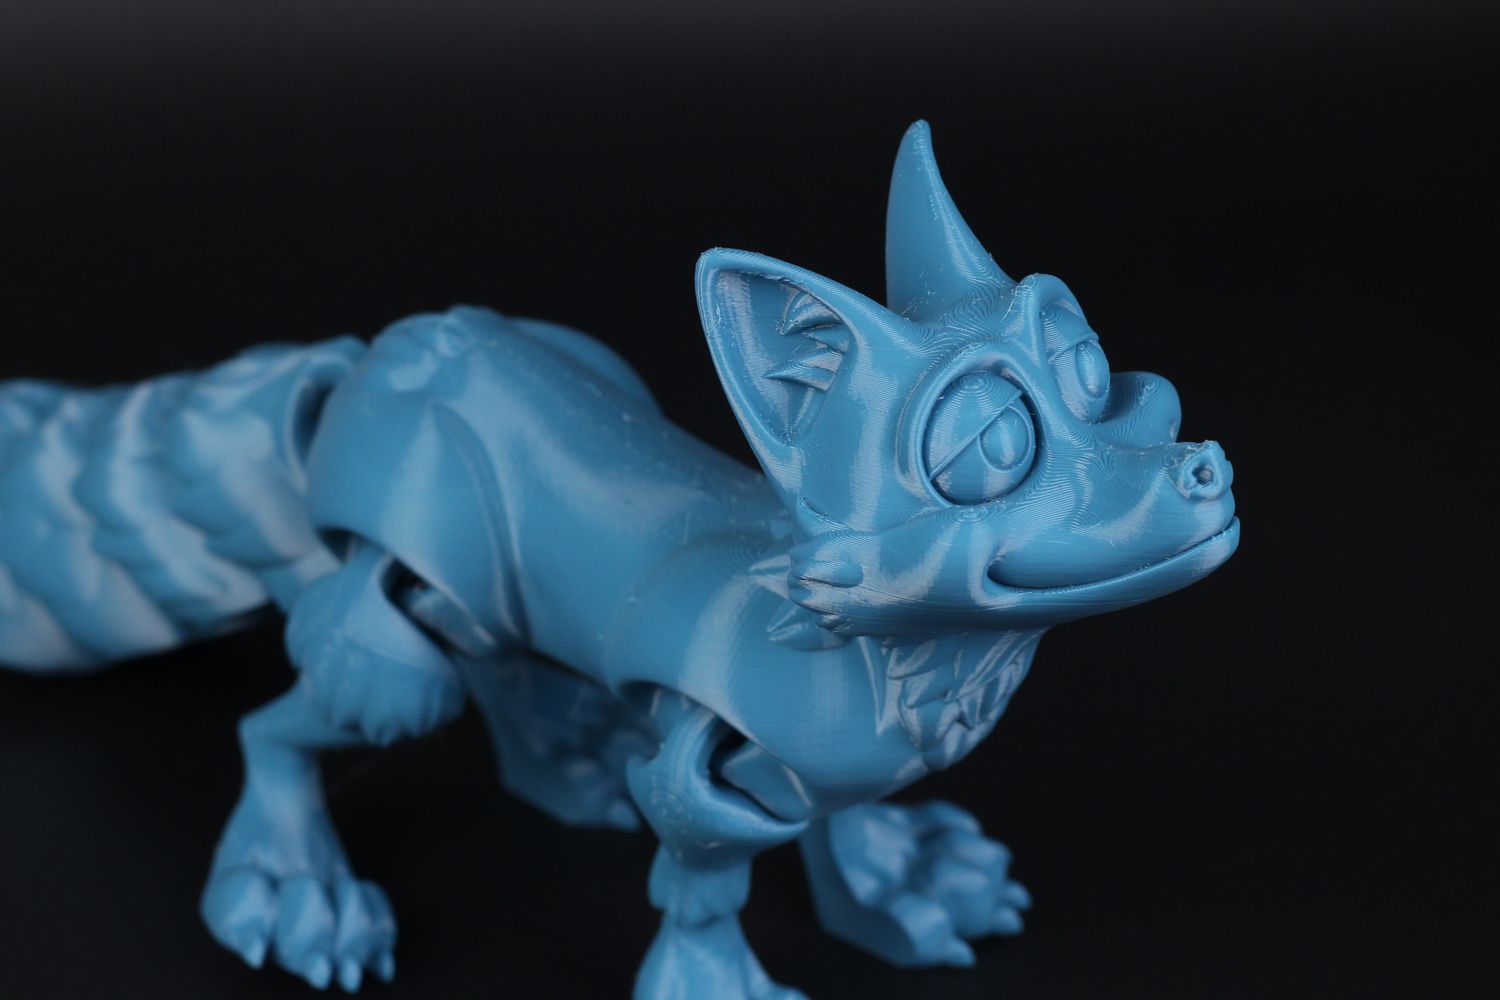 Flexi Fox printed on Creality CR M4 in PETG4 | Creality CR-M4 Review: Large Format 3D Printer